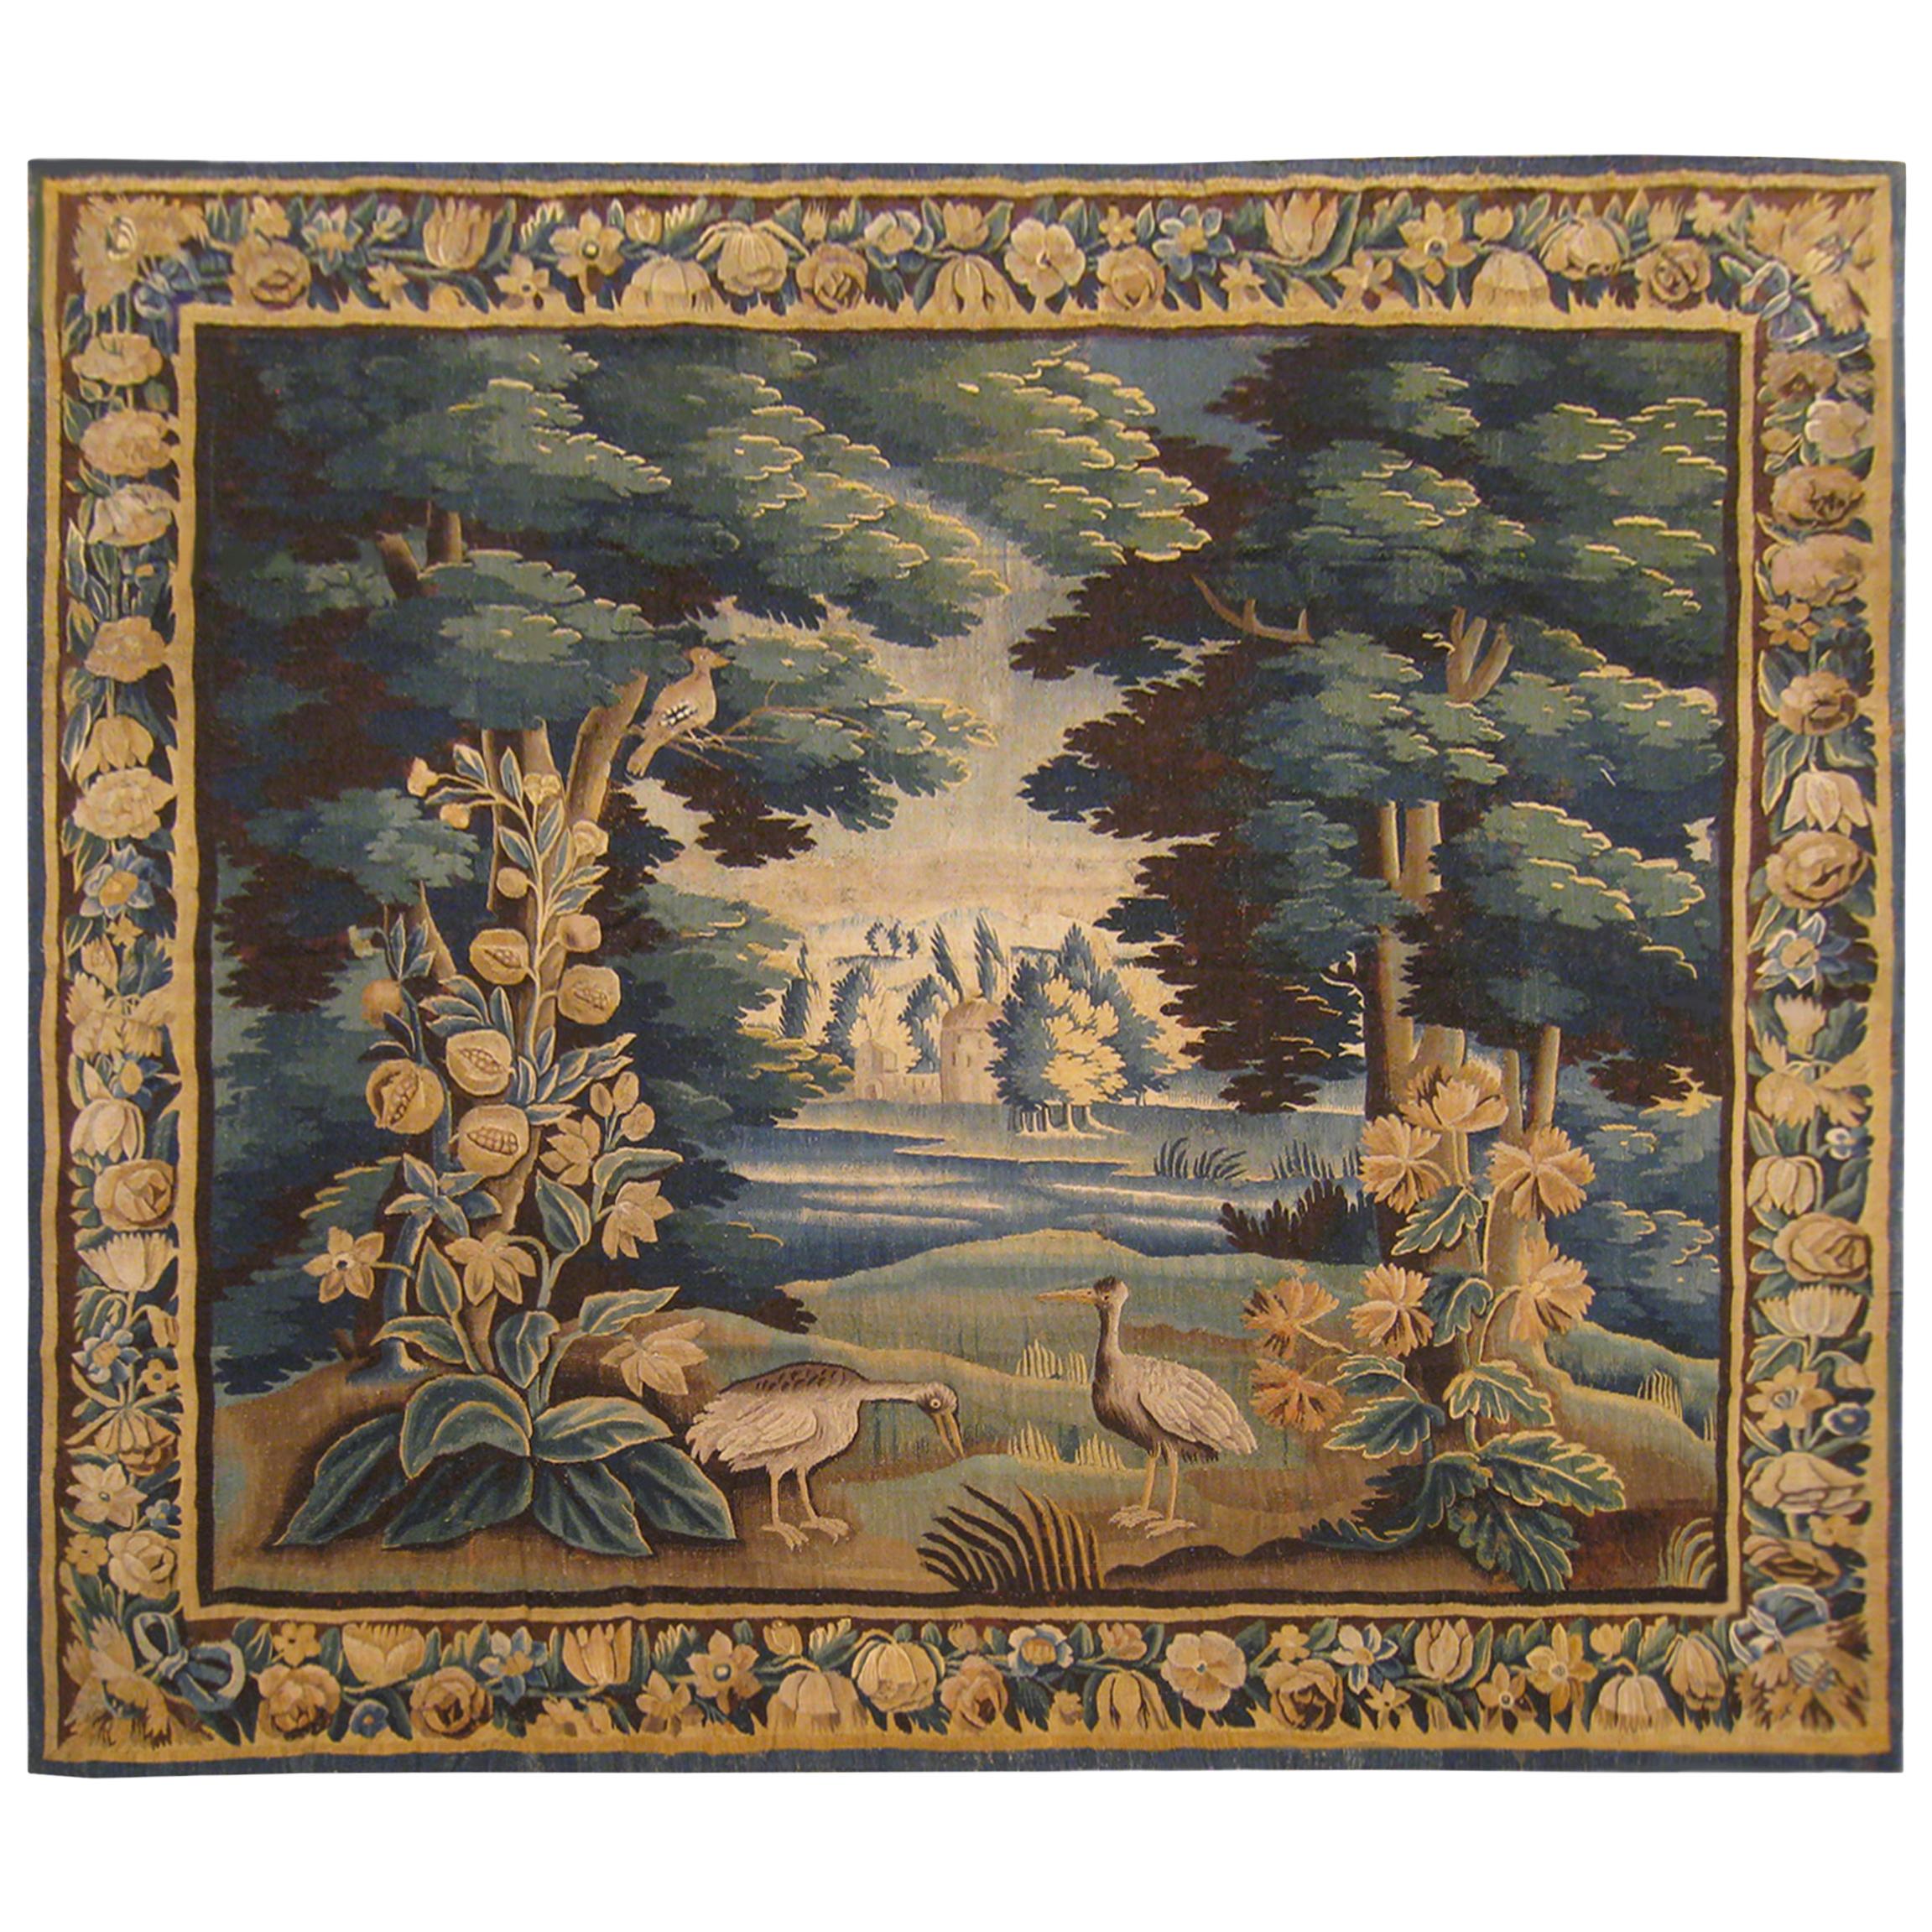 Antique 17th Century Flemish Verdure Tapestry, with Exotic Birds in a Landscape